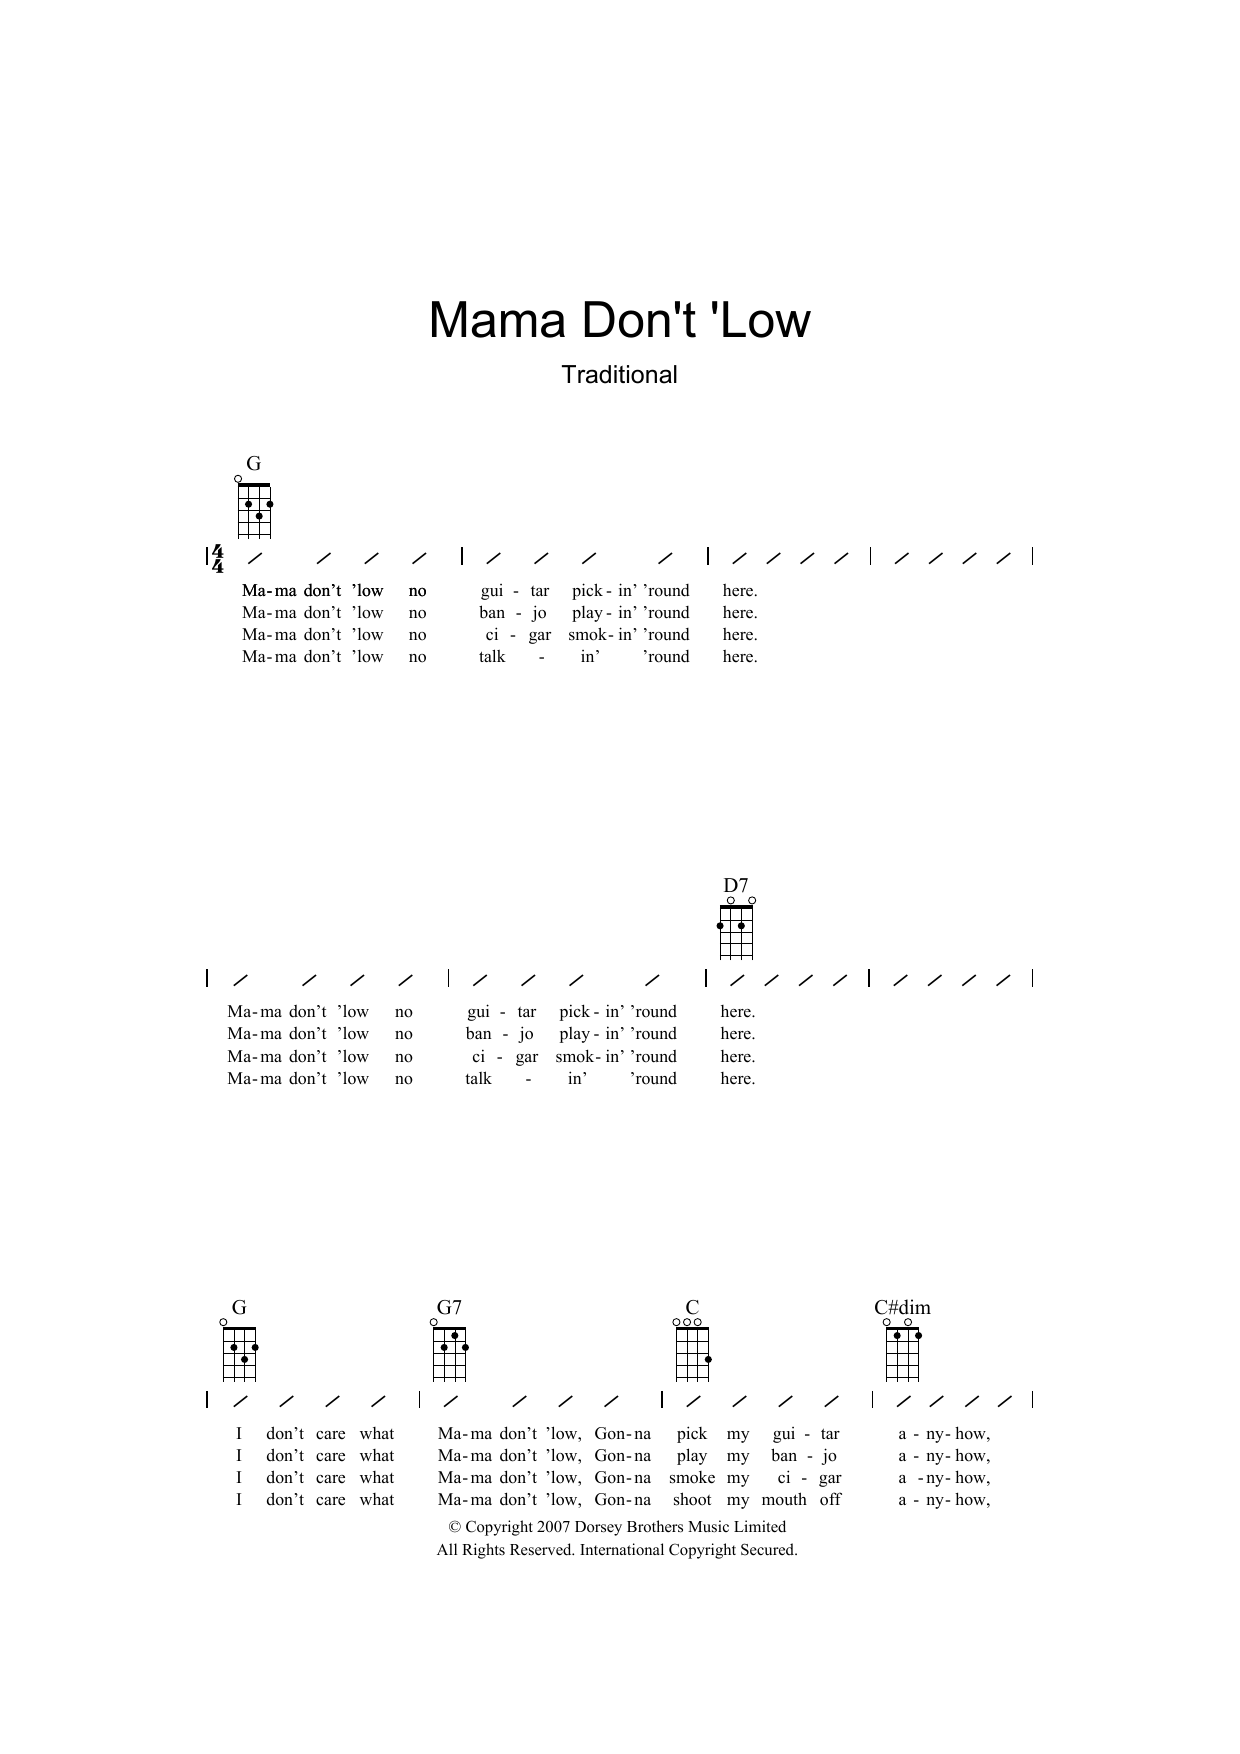 Download Traditional Mama Don't 'Low Sheet Music